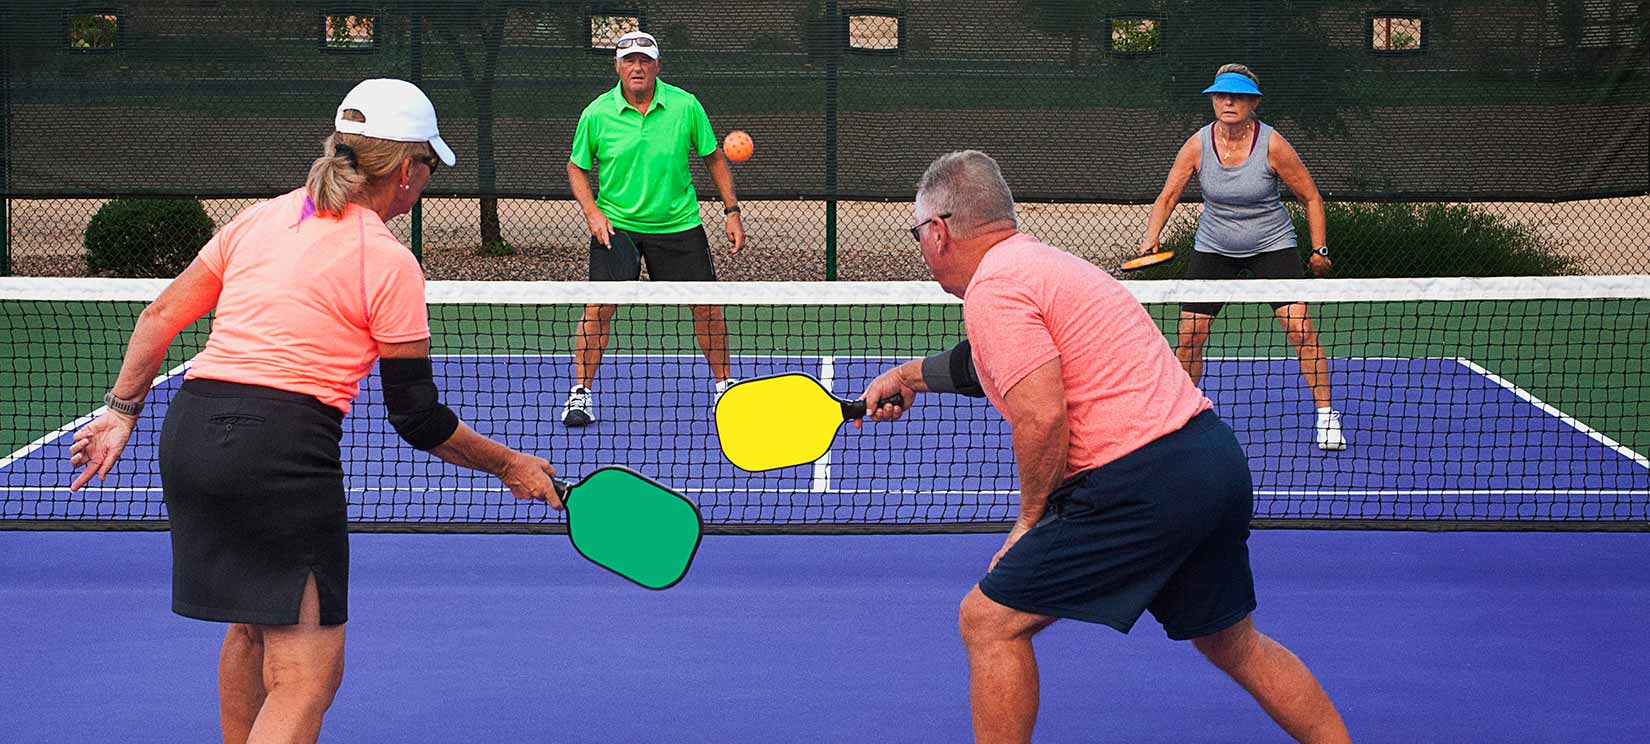 Playing Pickleball South Amenity Center at Nexus in Gallatin Tennessee